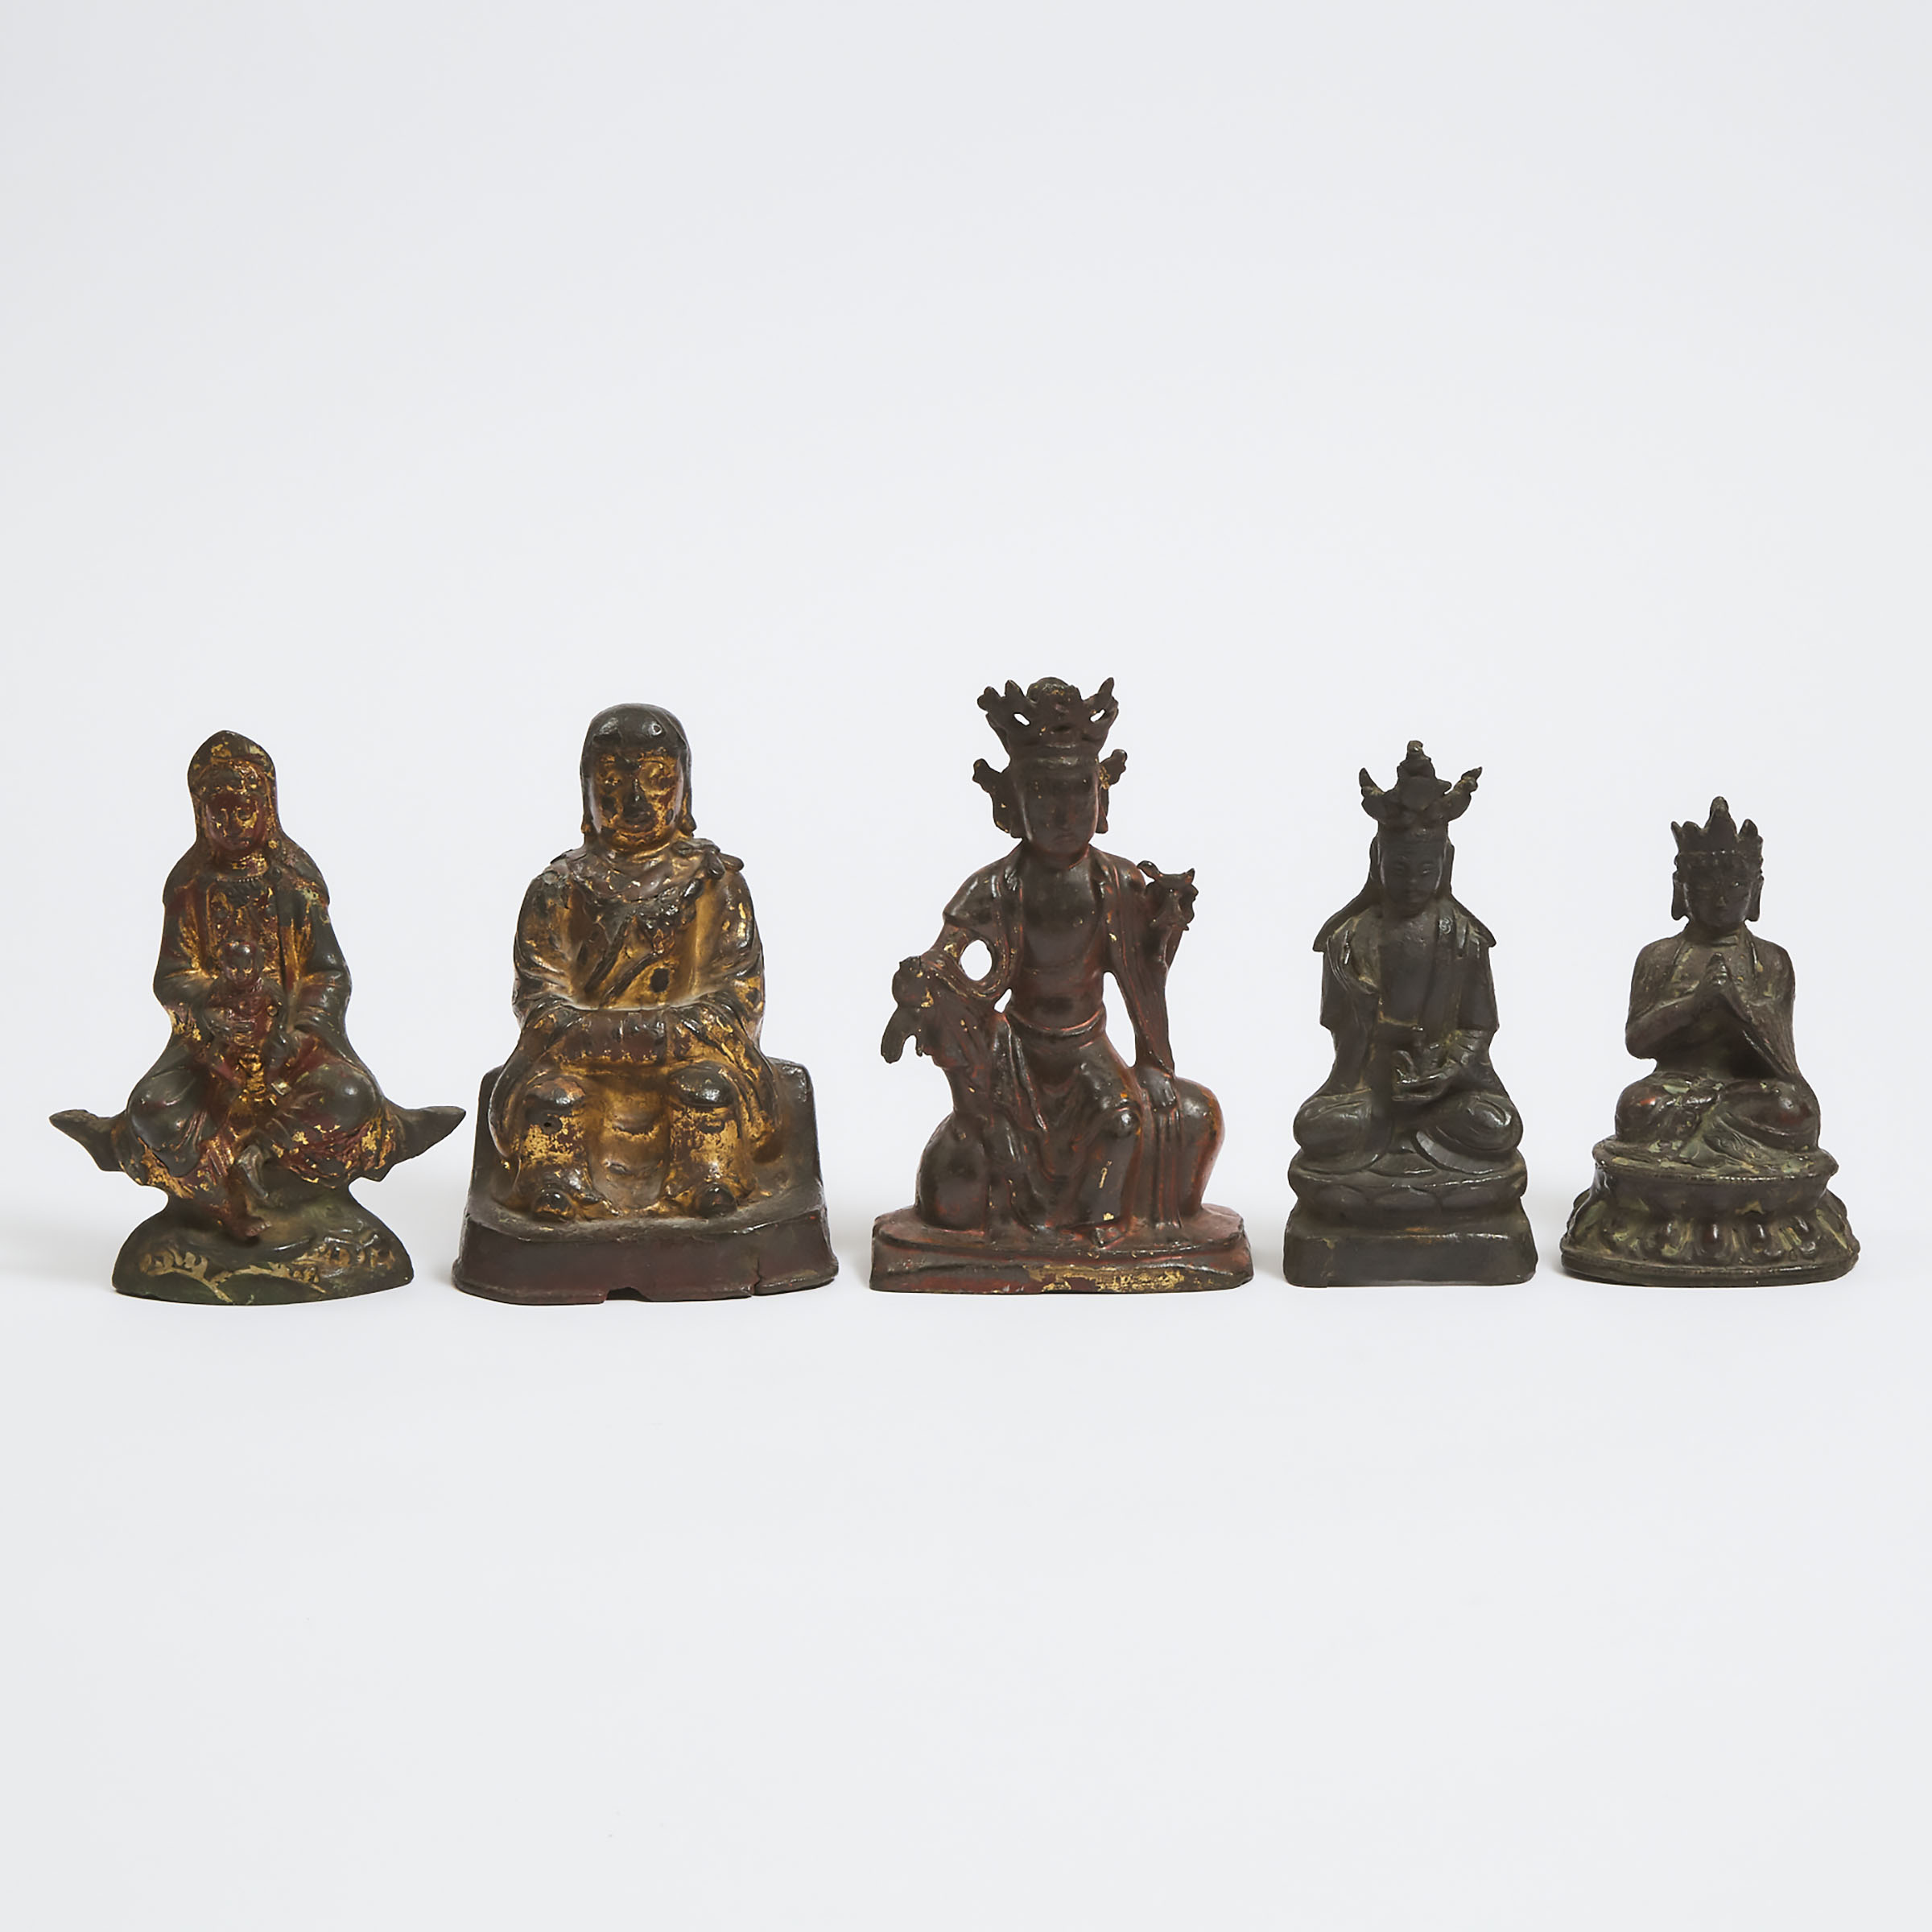 A Group of Five Bronze Figures, Ming Dynasty, 16th/17th Century